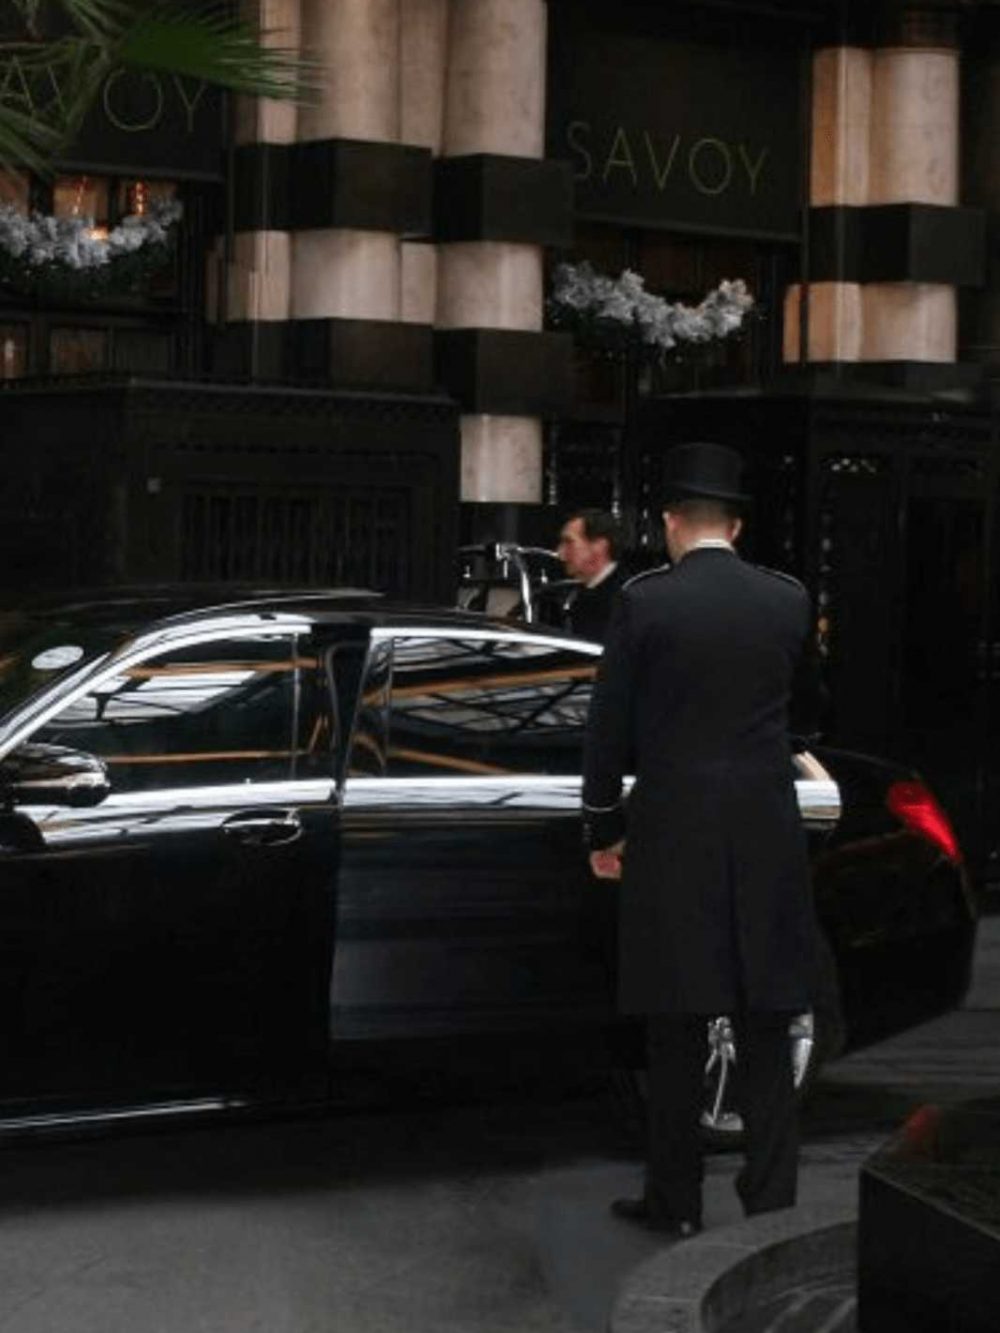 limo service in Wellesley - airport transfers to and from Wellesley MA Car service - Chauffeur - Limousine transportation